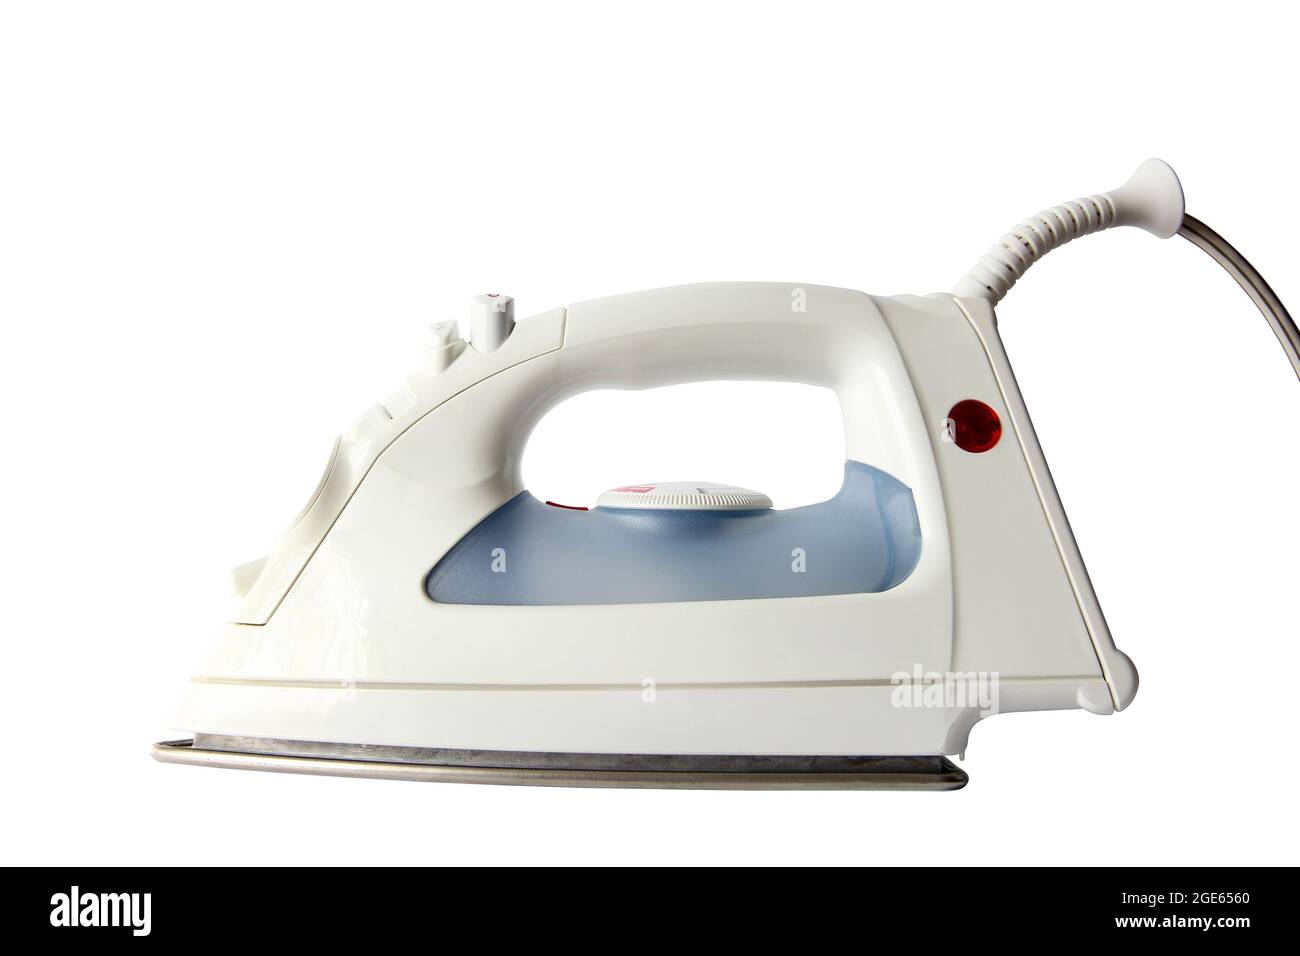 Electric iron on a white background. The iron is horizontal. Household electrical appliance Stock Photo